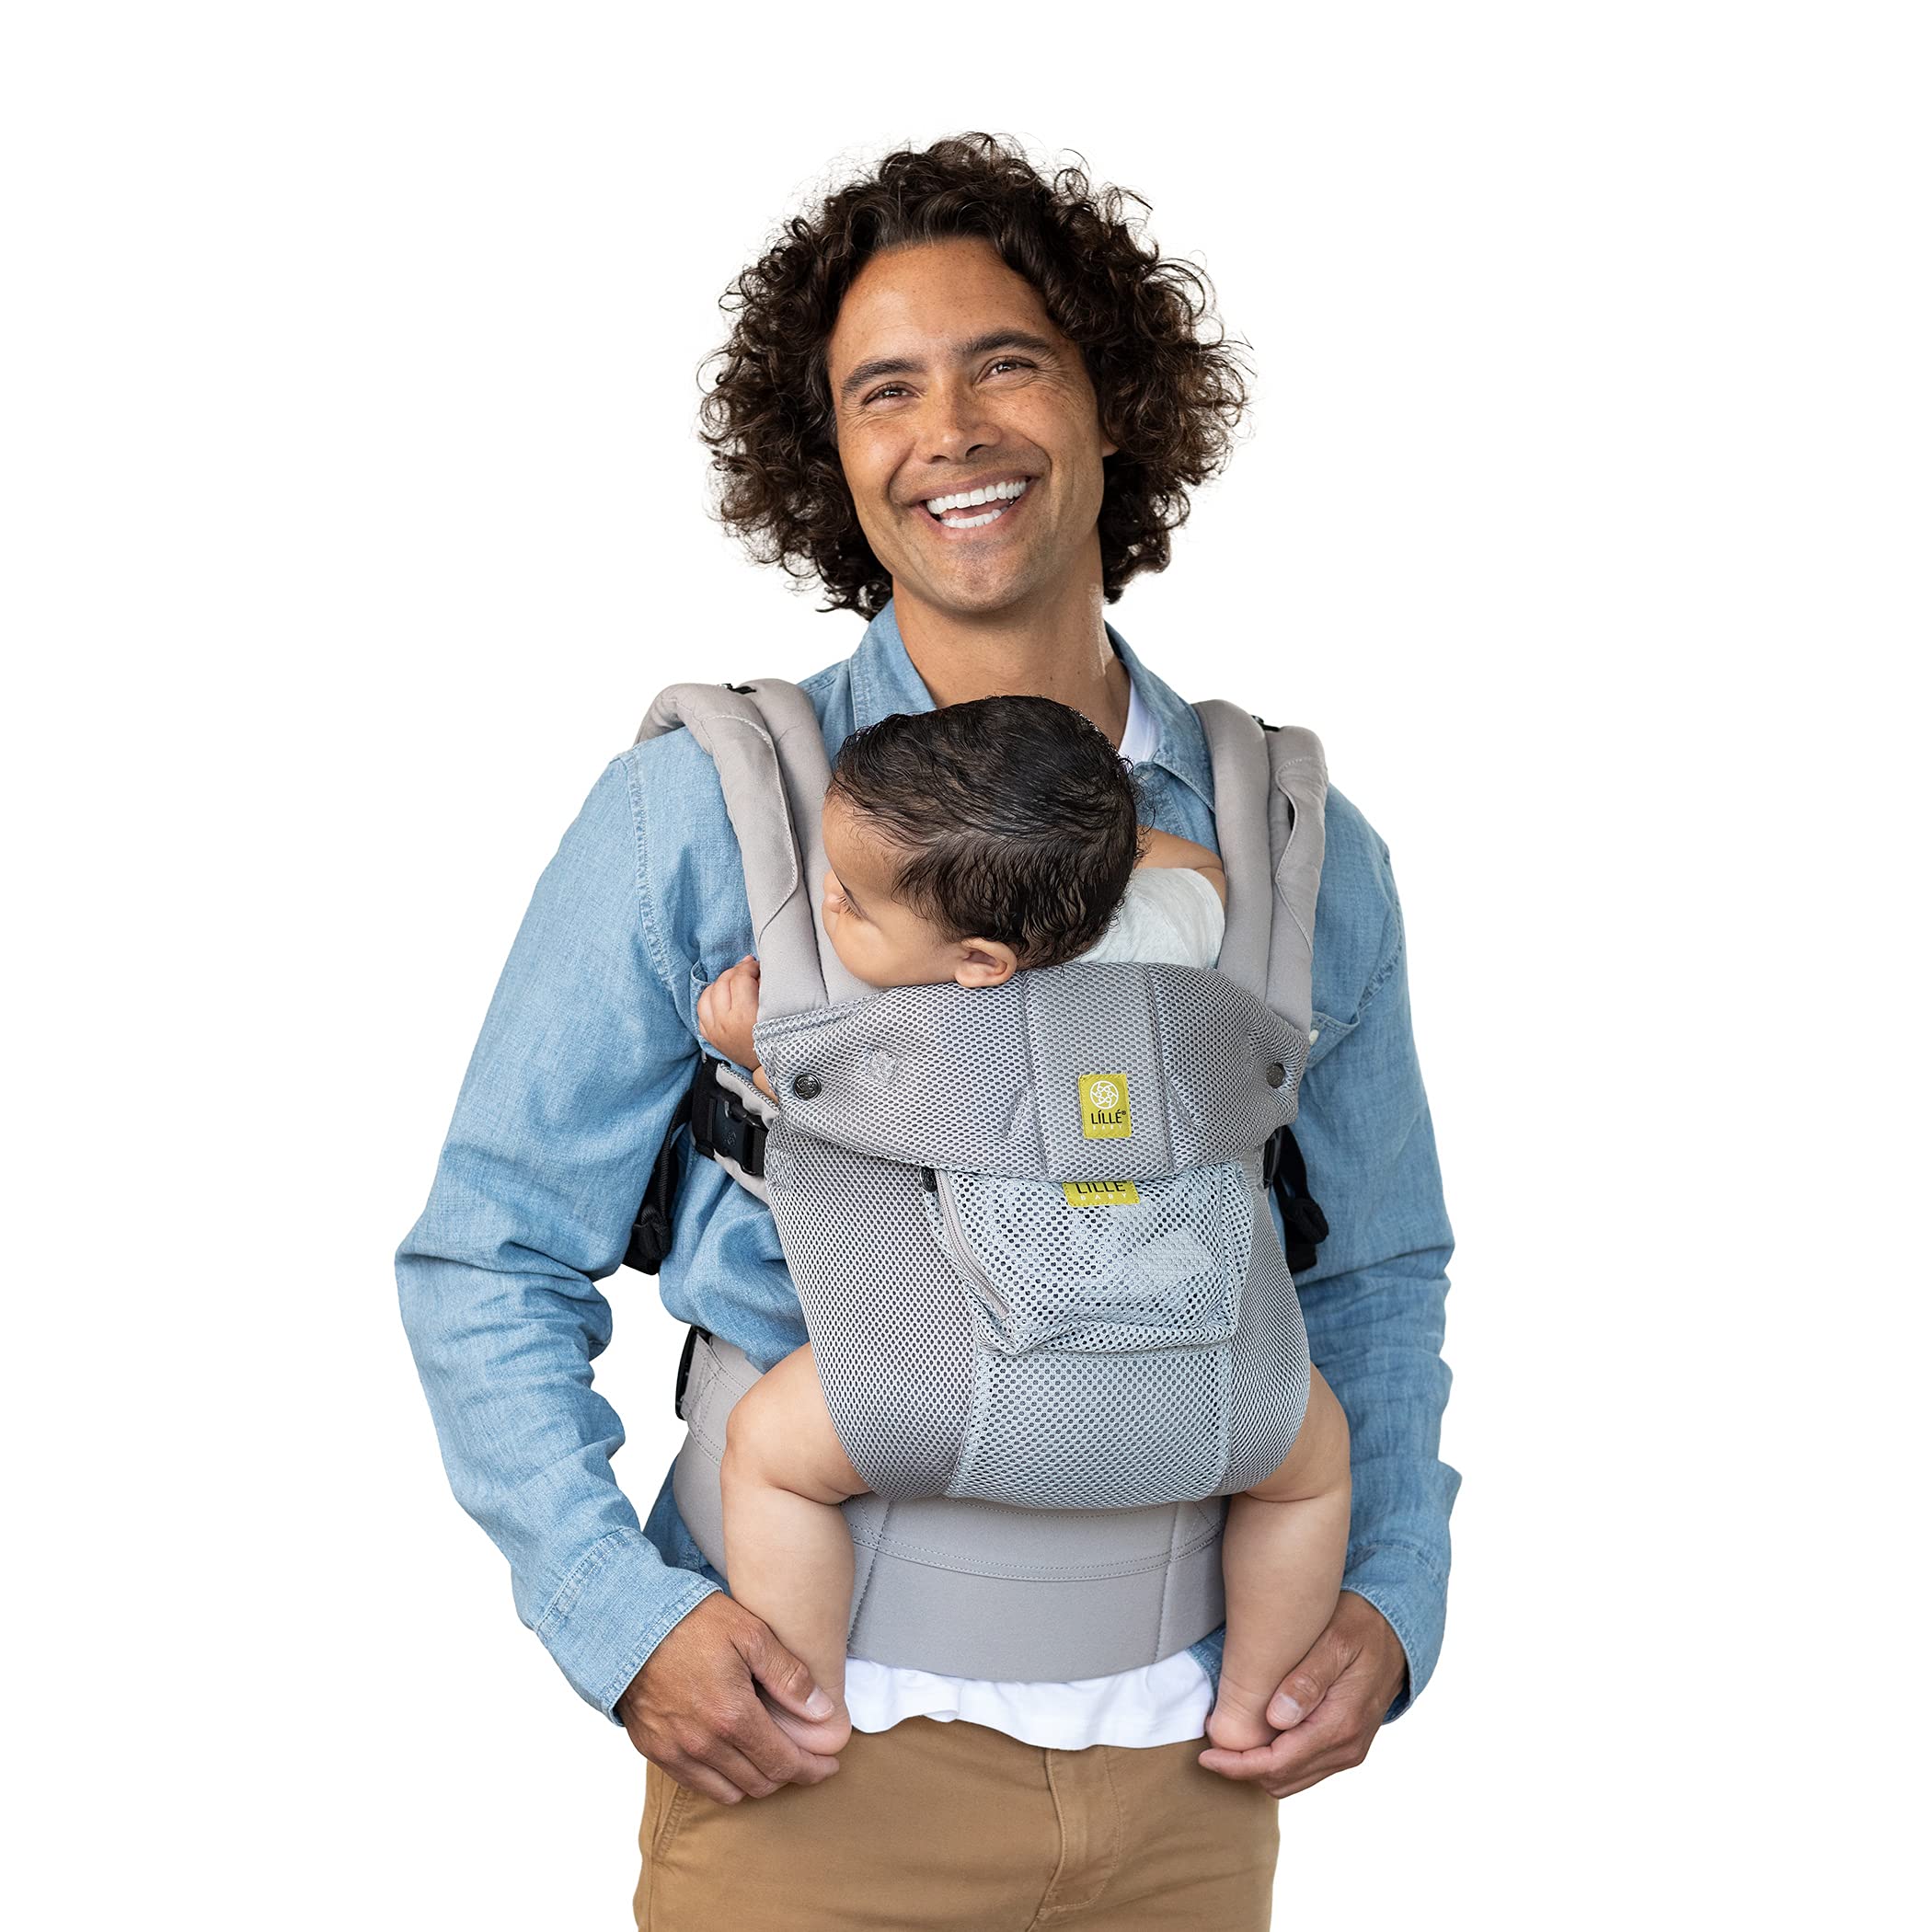 LÍLLÉbaby Complete Airflow Ergonomic 6-in-1 Baby Carrier Newborn to Toddler - with Lumbar Support - for Children 7-45 Pounds - 360 Degree Baby Wearing - Inward and Outward Facing - Silver